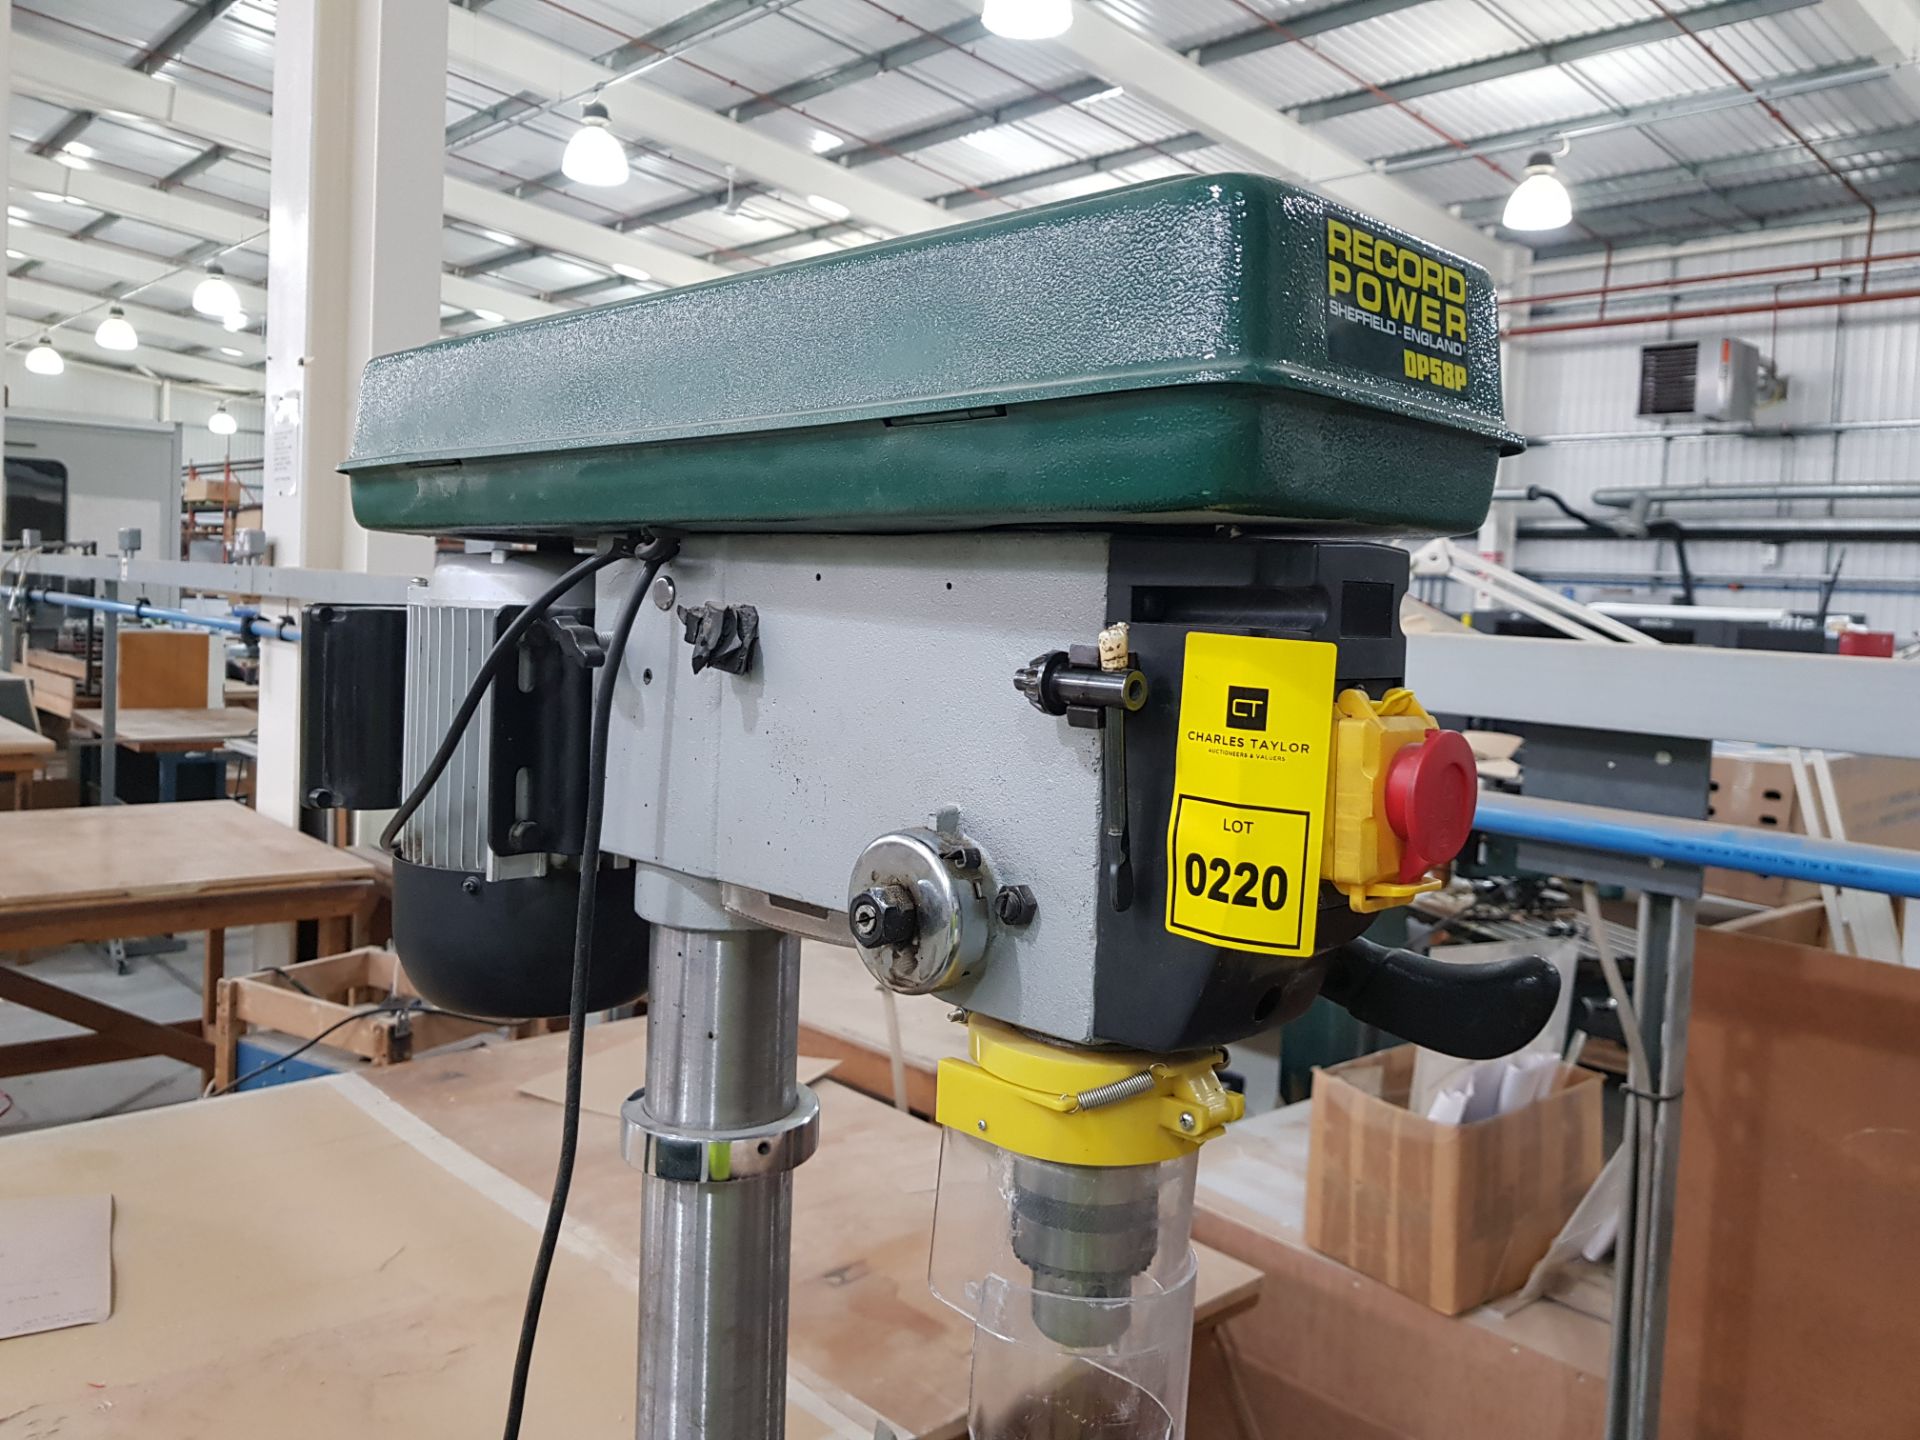 1 X RECORD POWER DP 58B 16MM CHUCK SPINDLE TO COLUMN 165MM - BENCH DRILLING MACHINE (NOT WORKING) - Image 5 of 6